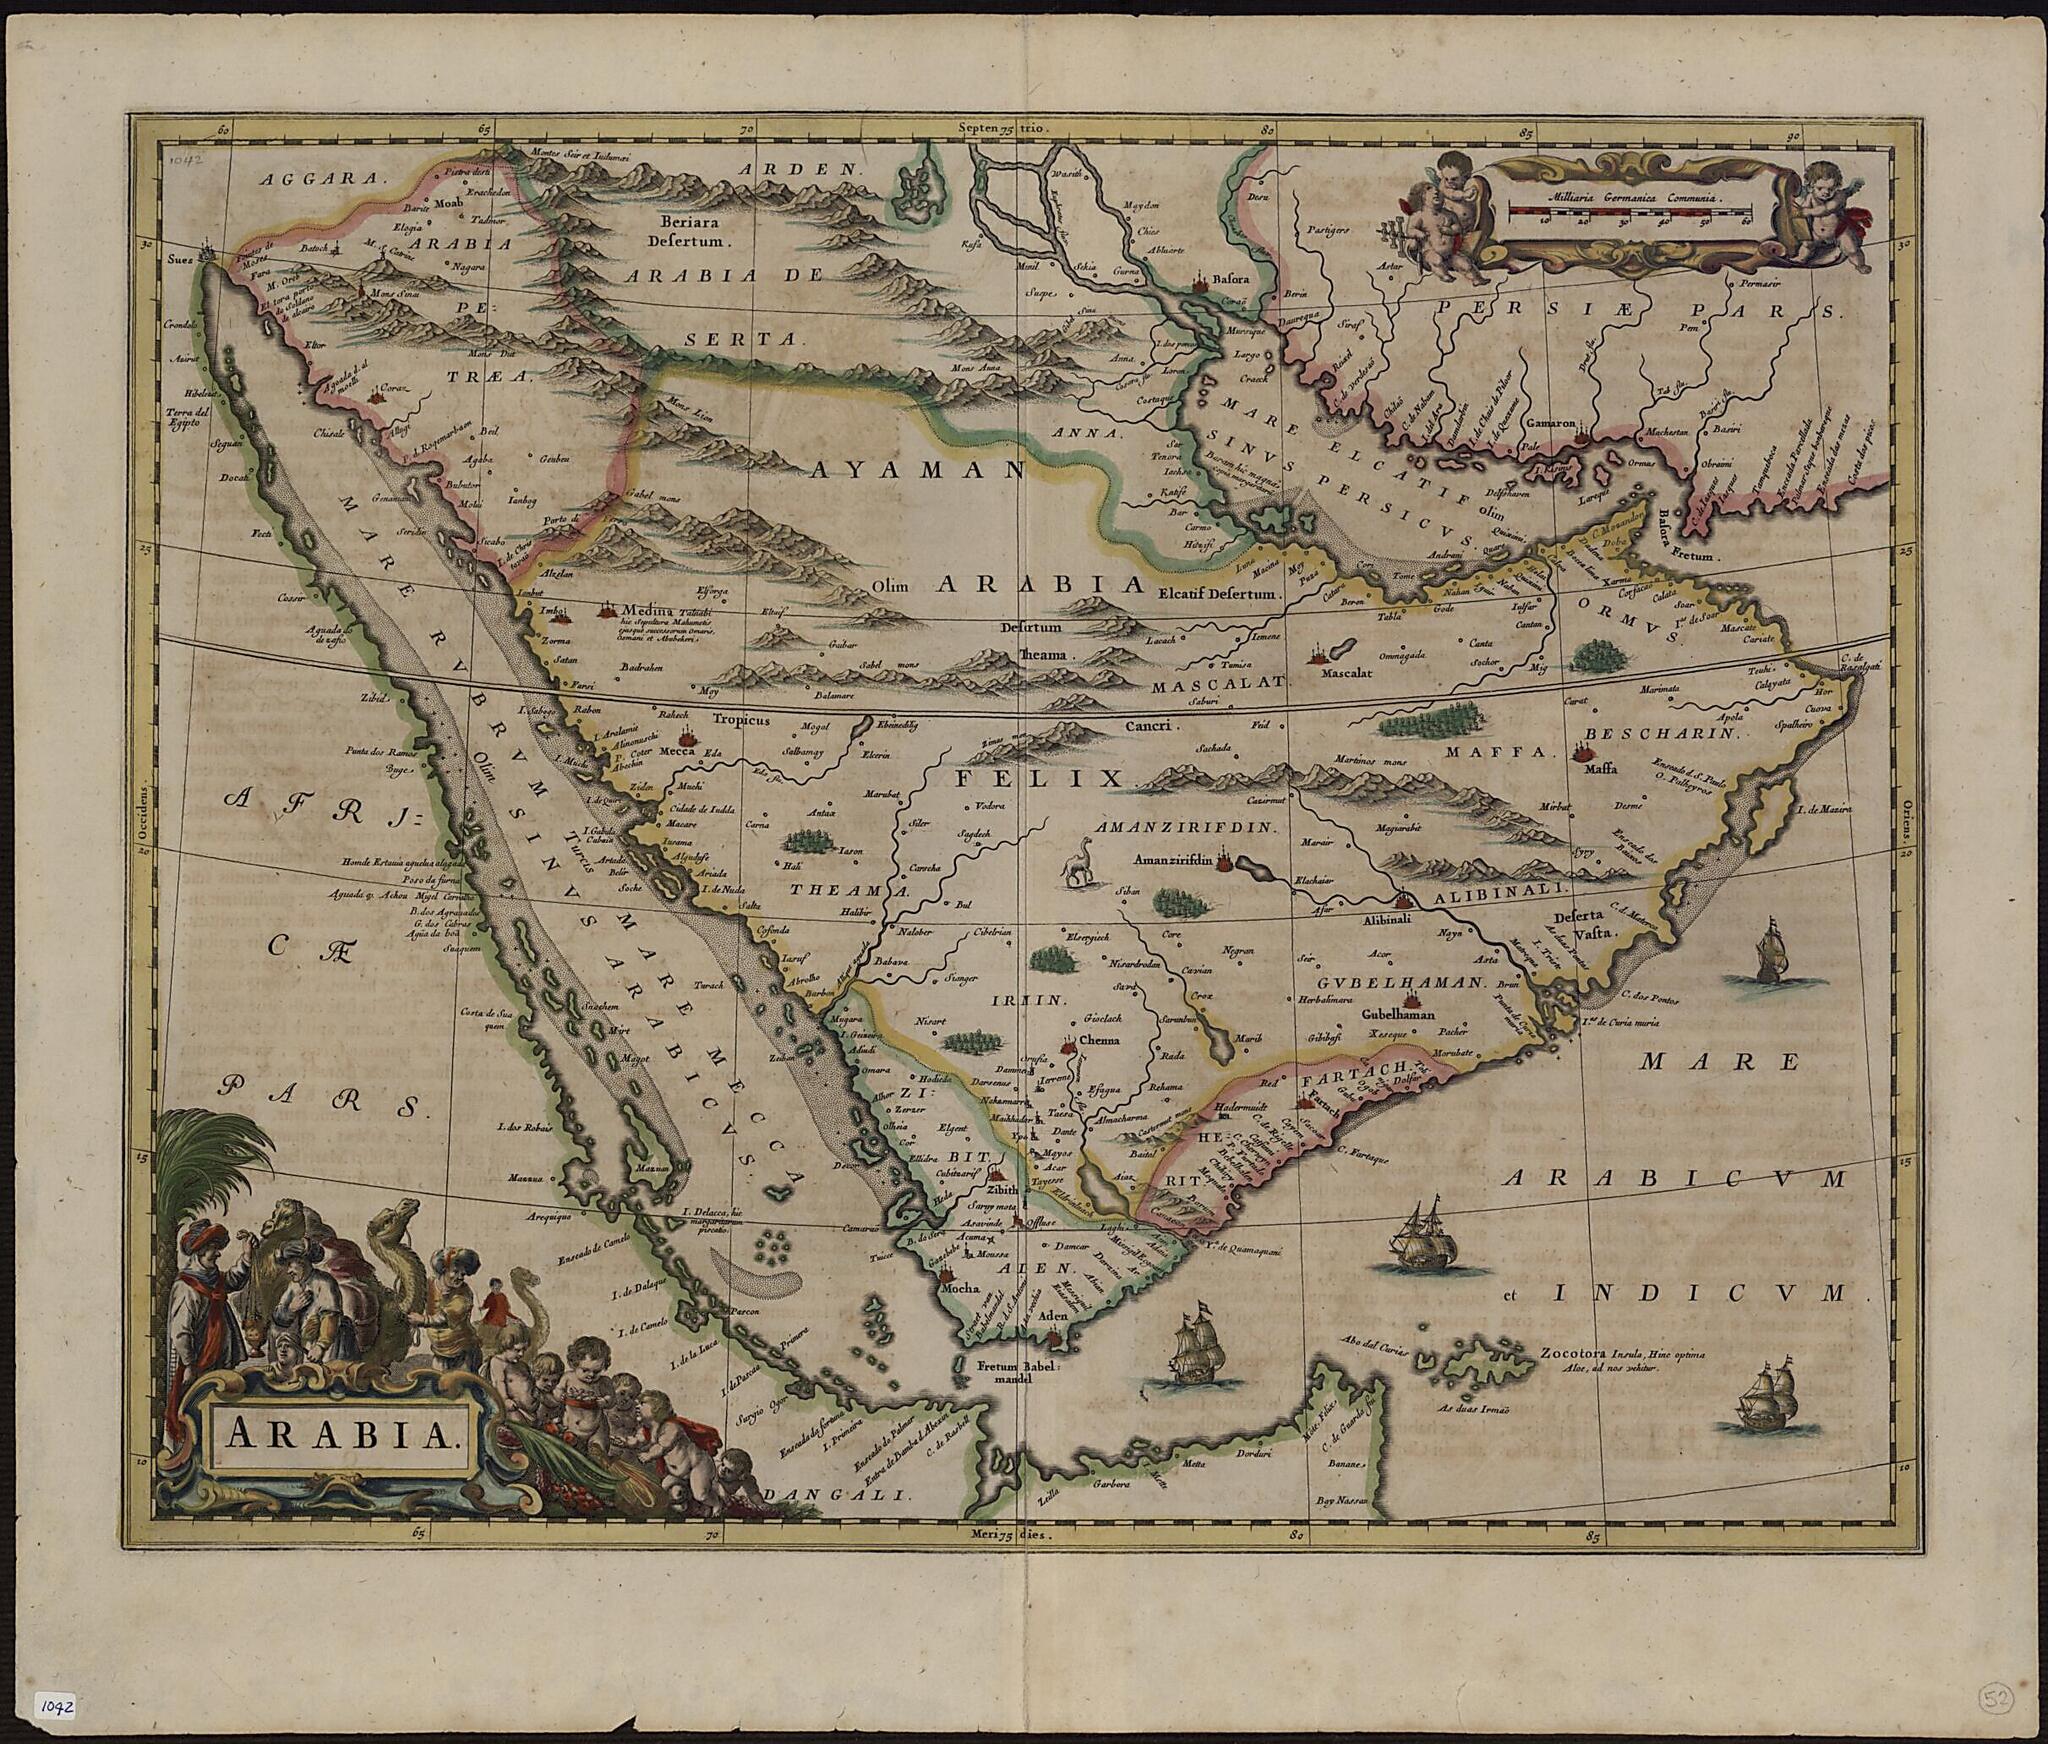 This old map of Arabia from 1622 was created by Willem Janszoon Blaeu in 1622